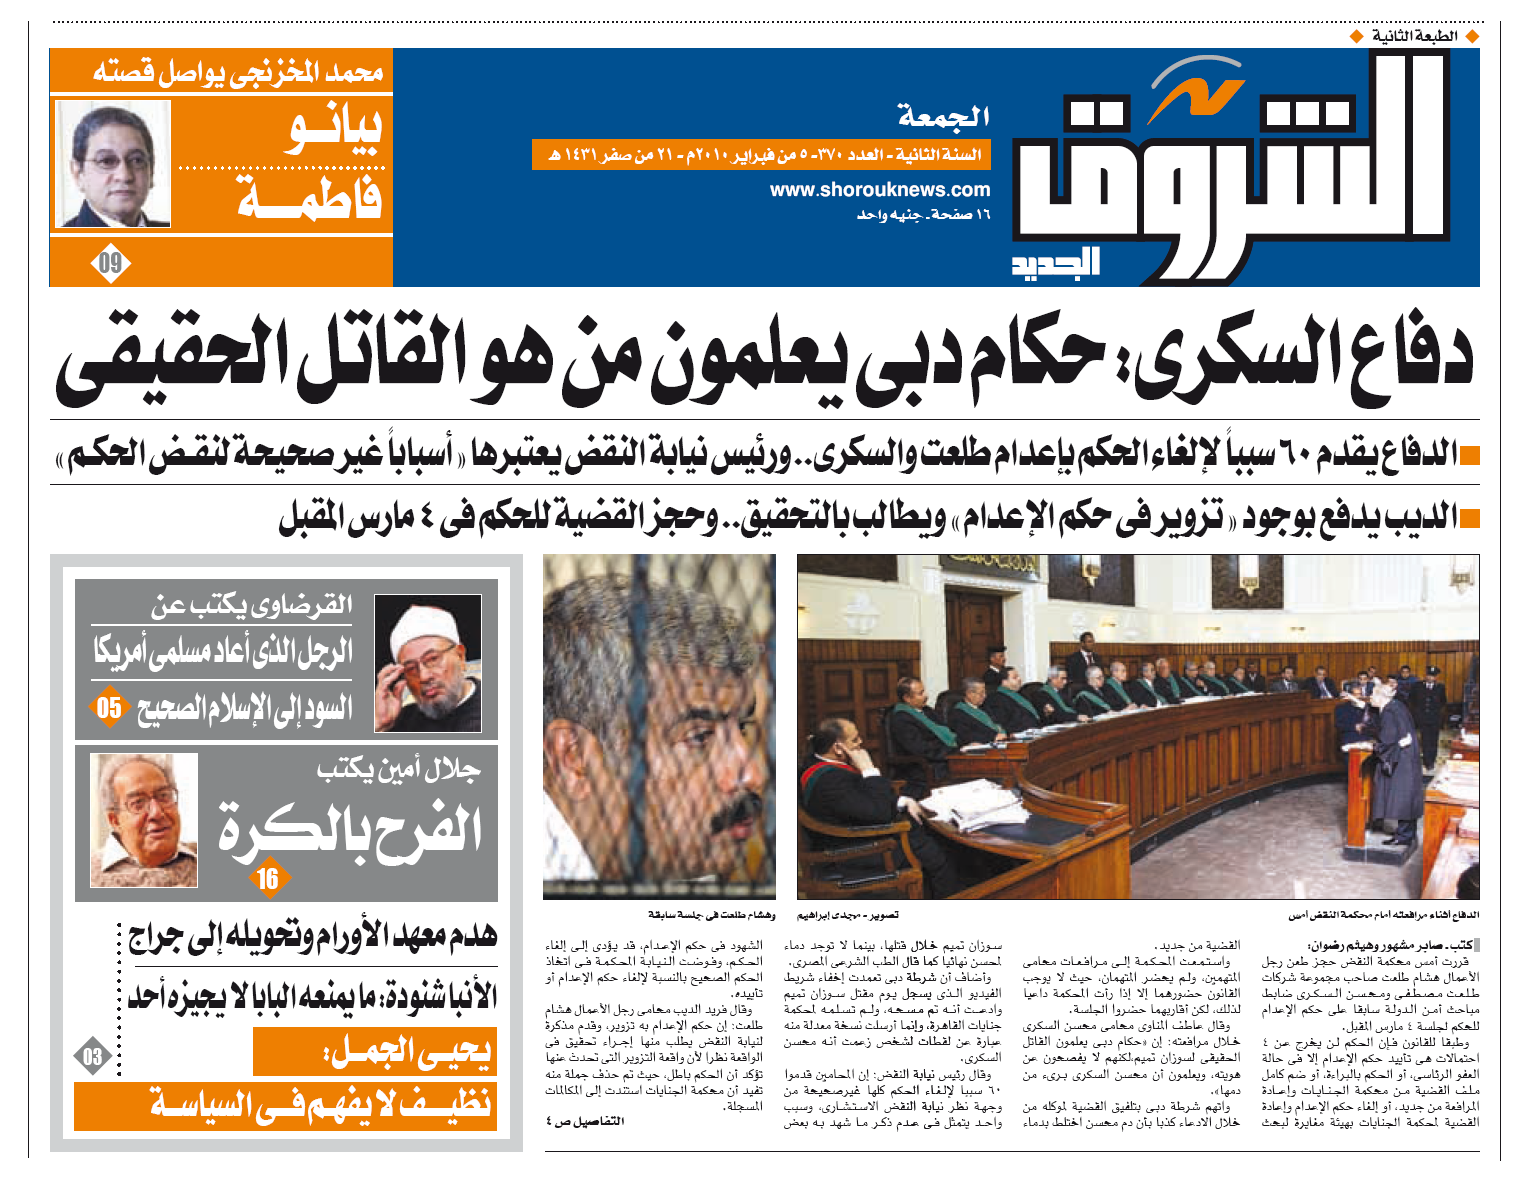 Egyptian Court of Appeals hearing of singer Suzanne Tamim murder case as reported on the front page of the Egyptian daily A-Shorouq, February 5, 2010.